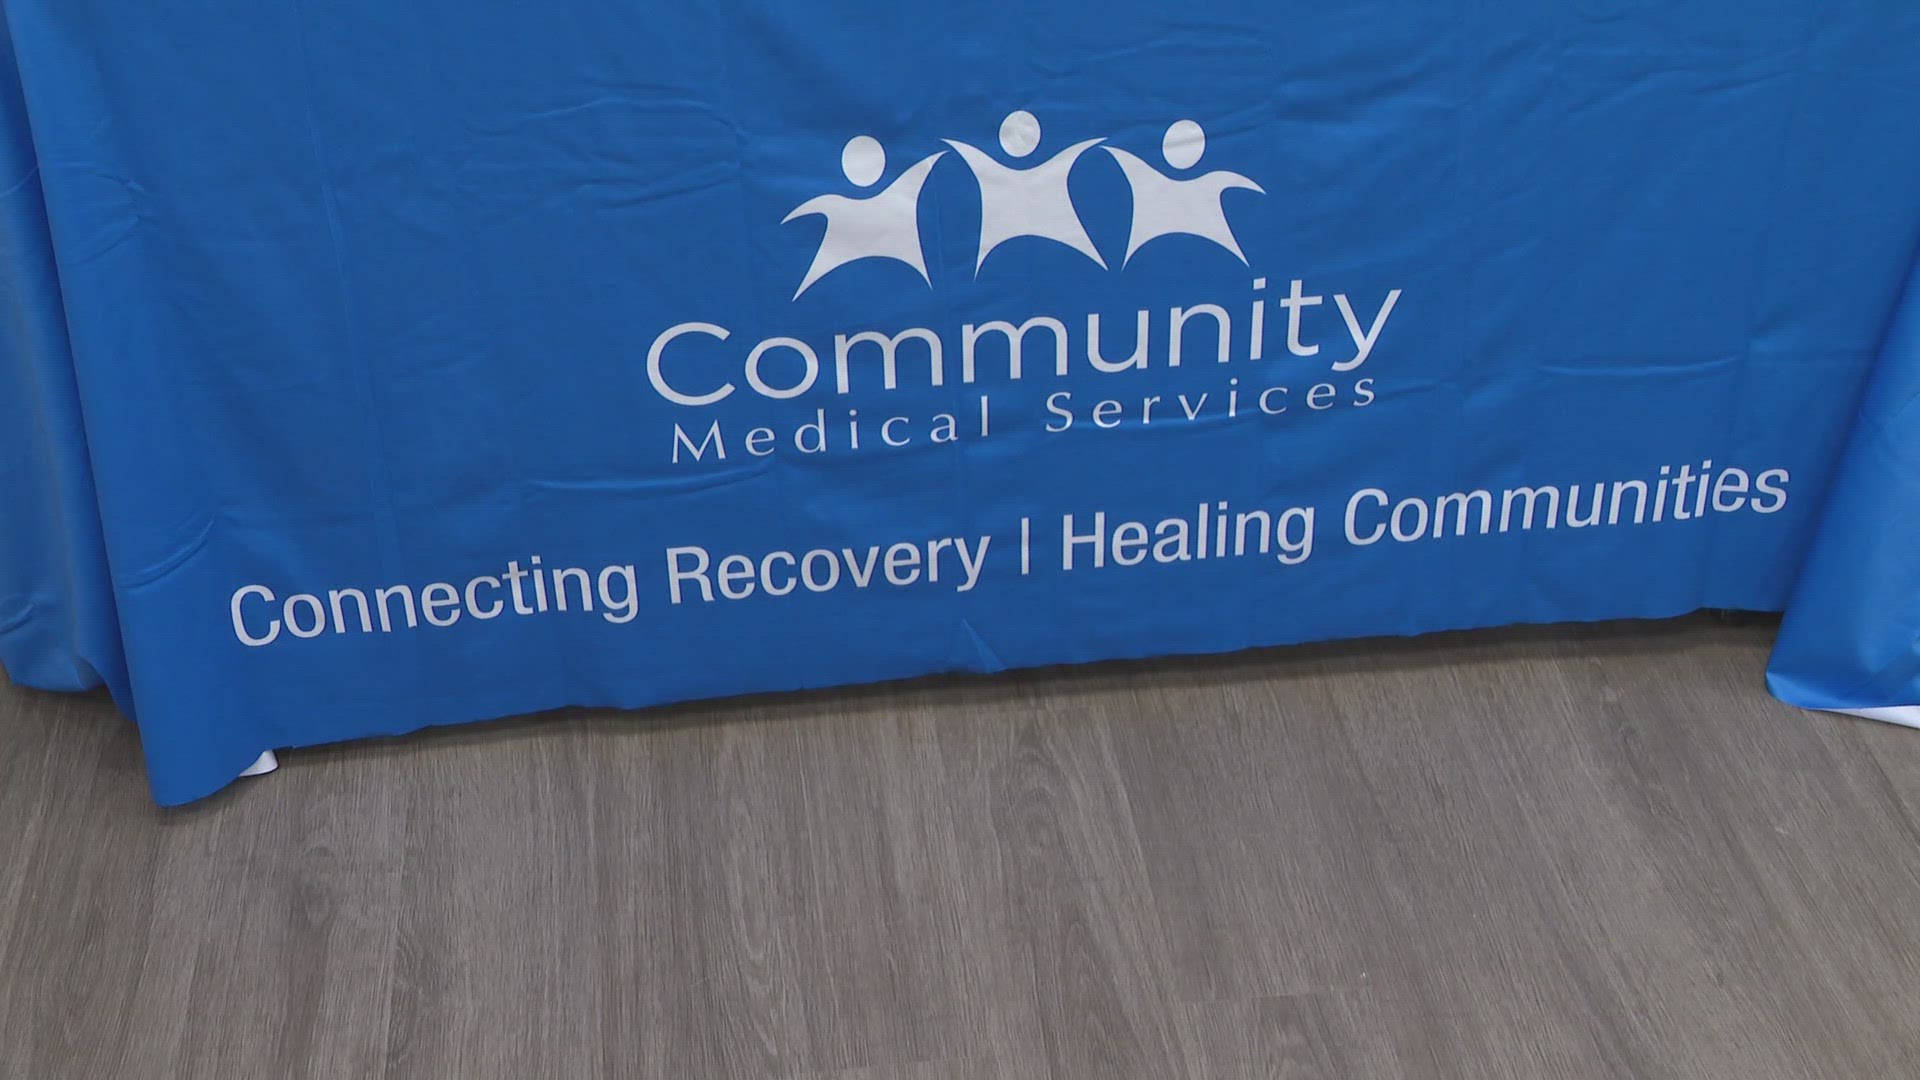 We're getting a first look inside the newly opened Community Medical Services location on Brookpark Road in Cleveland.